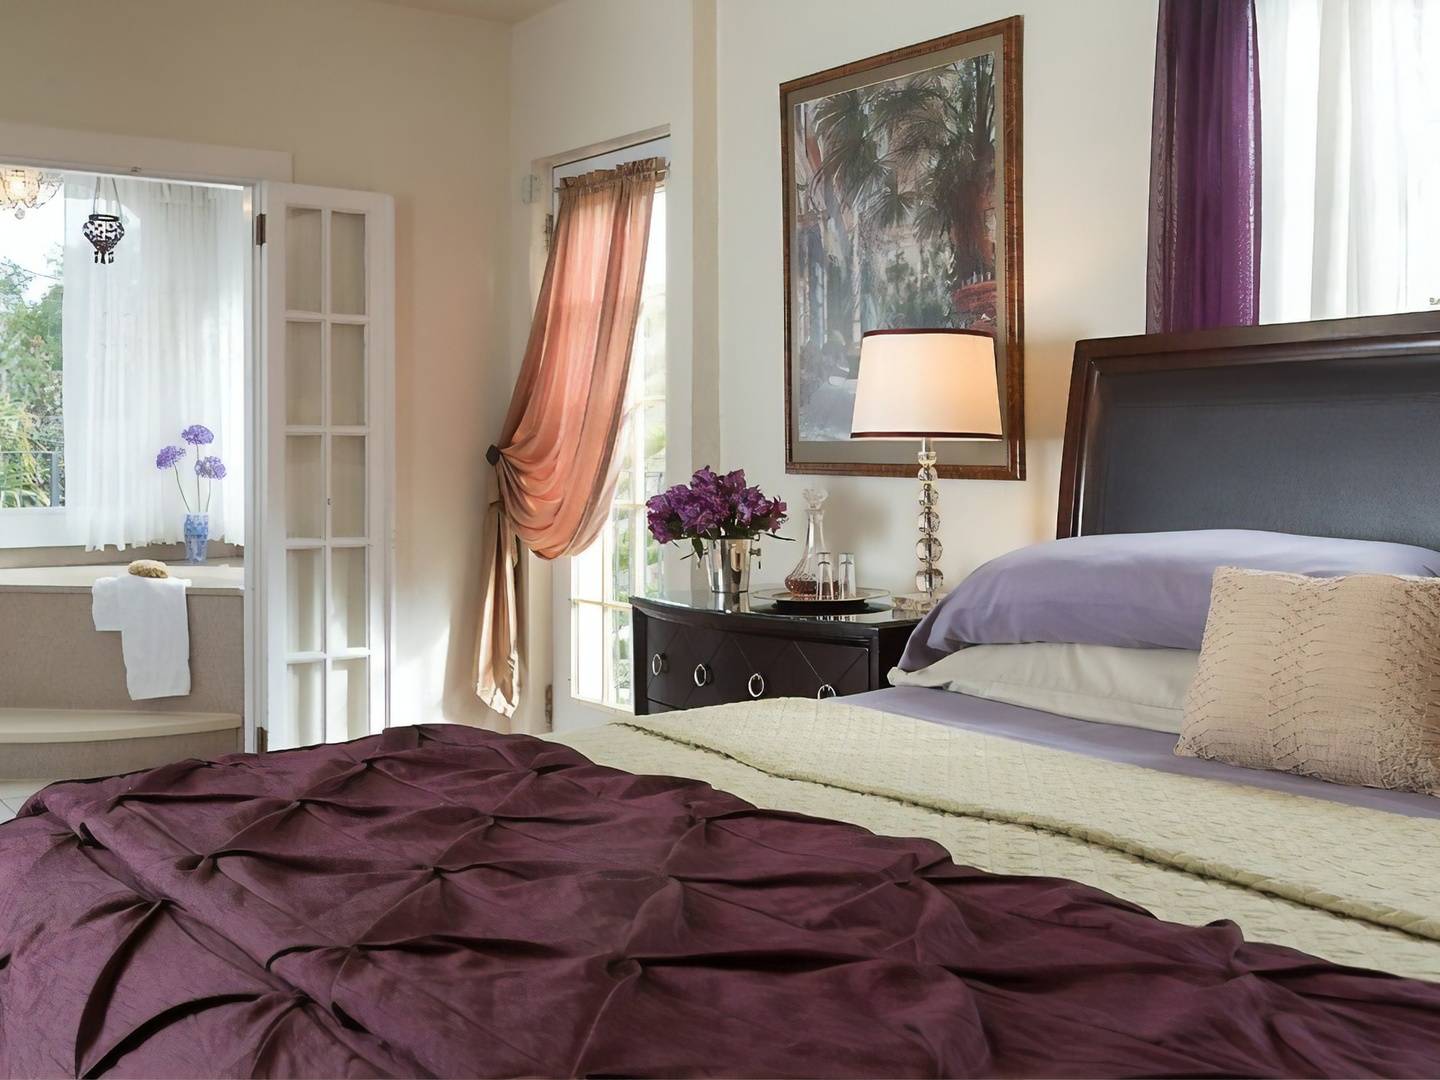 St. Augustine Bed and Breakfast